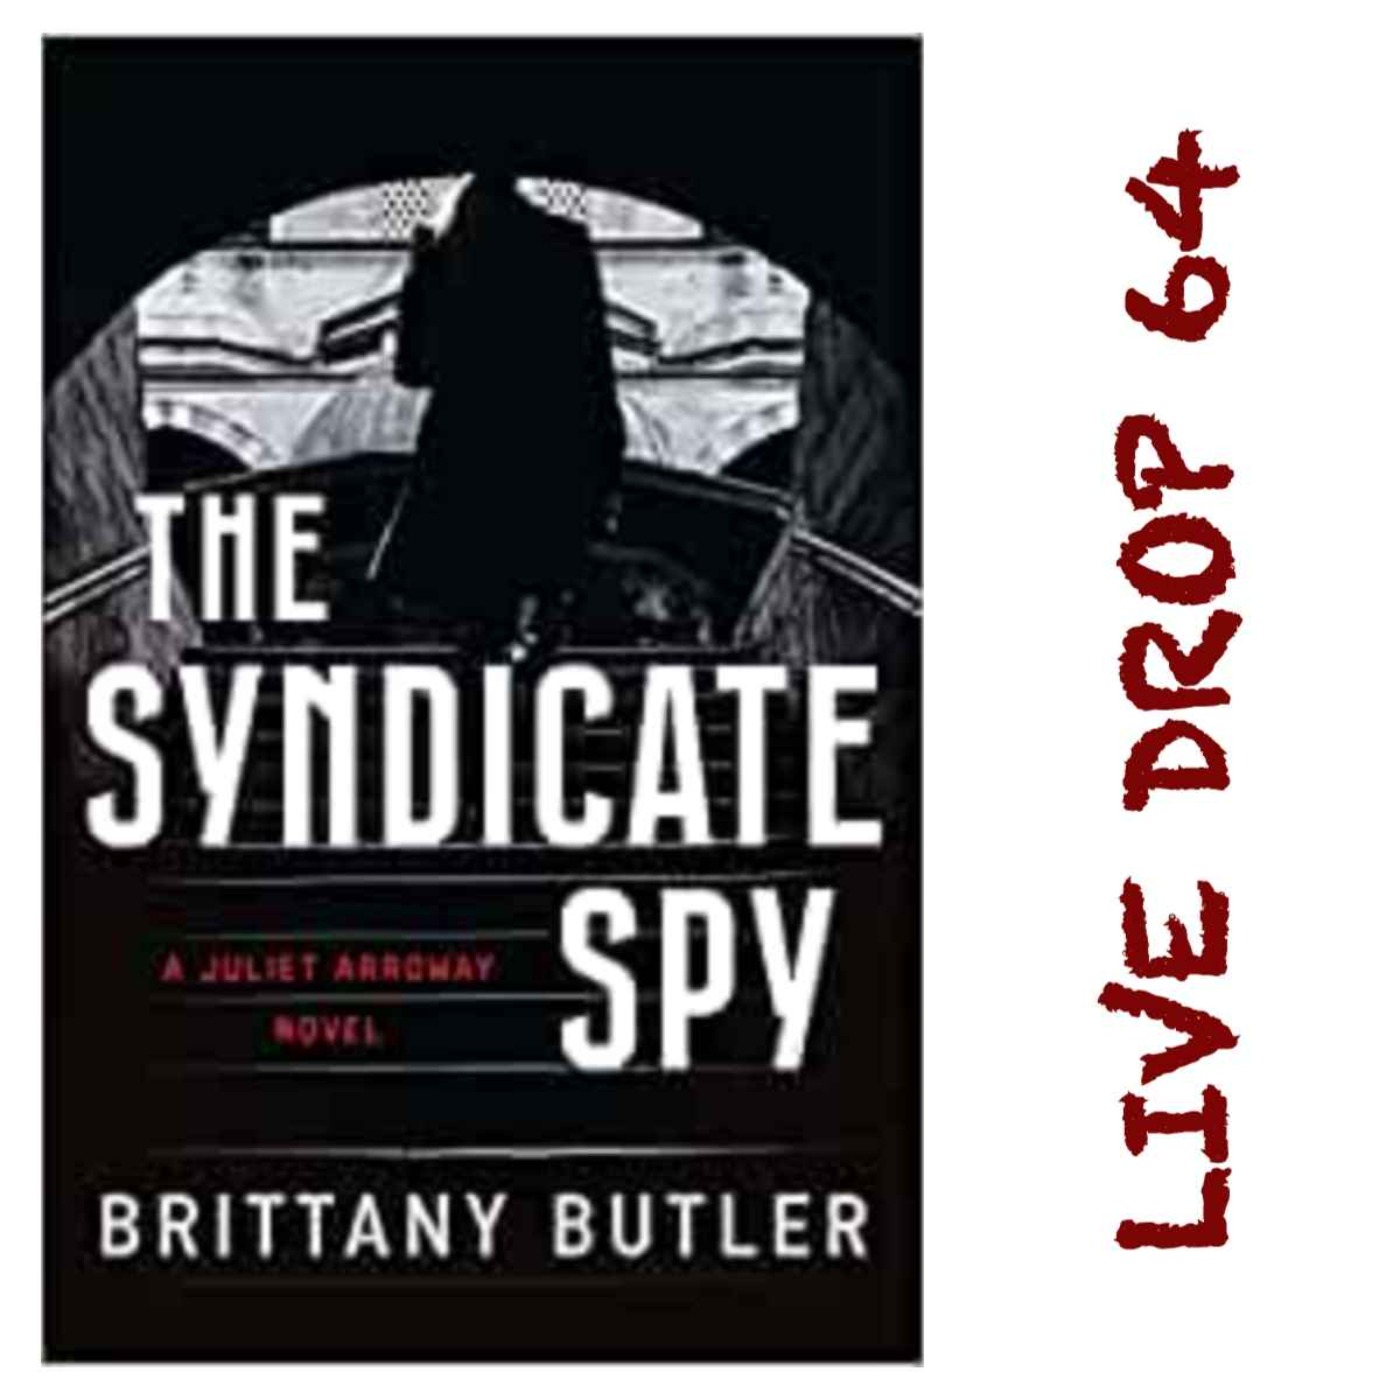 Syndicating the Experience of Brittany Butler